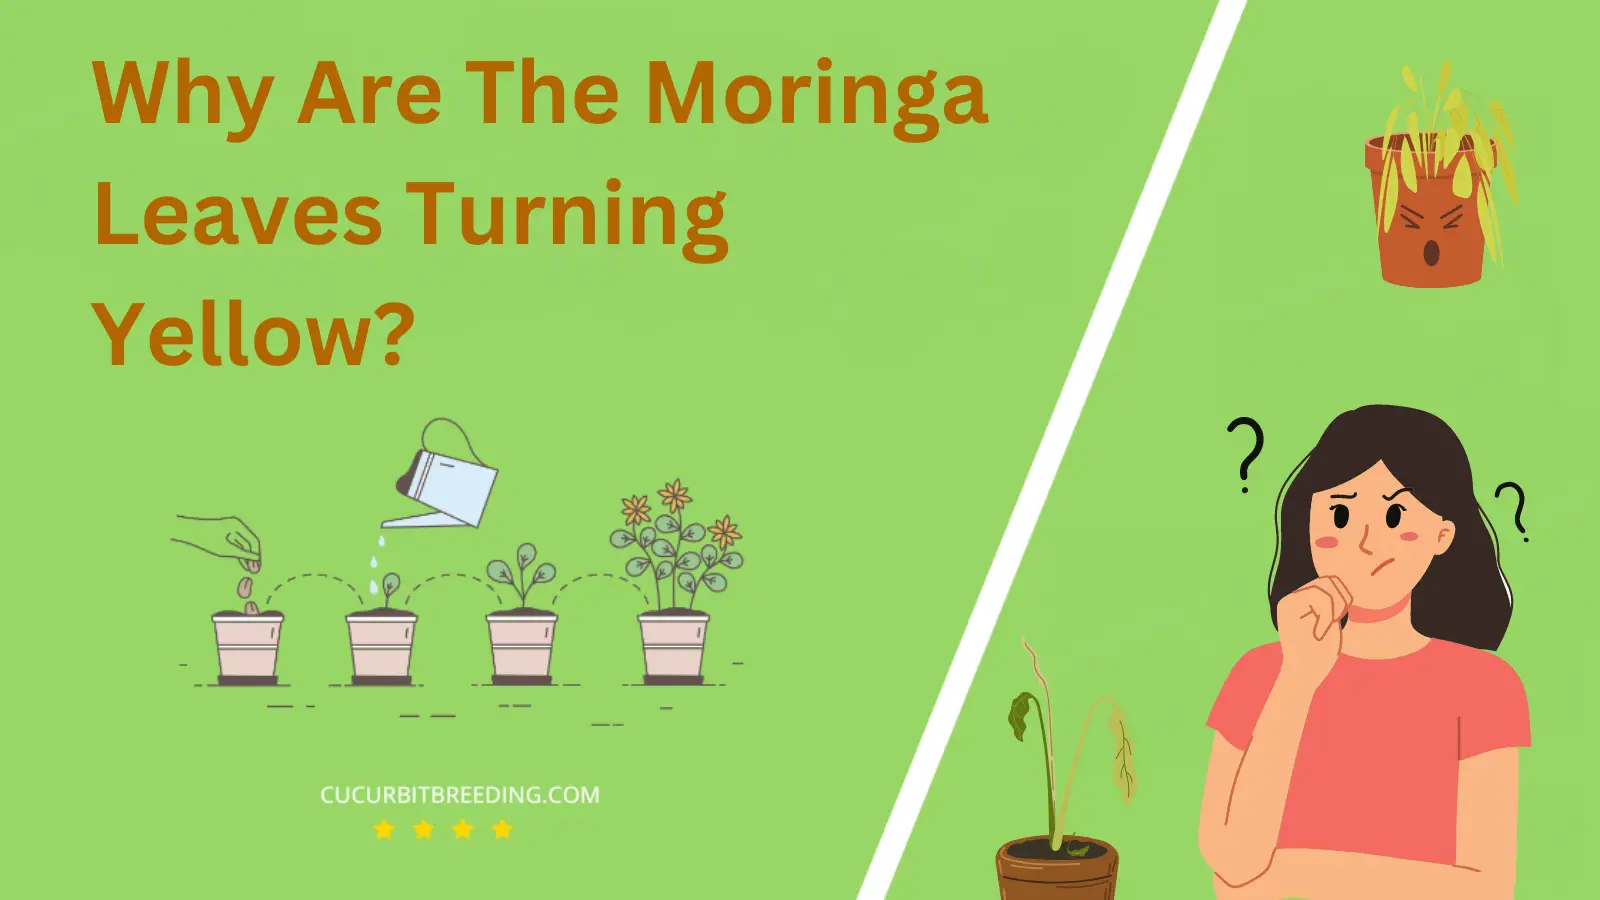 Why Are The Moringa Leaves Turning Yellow